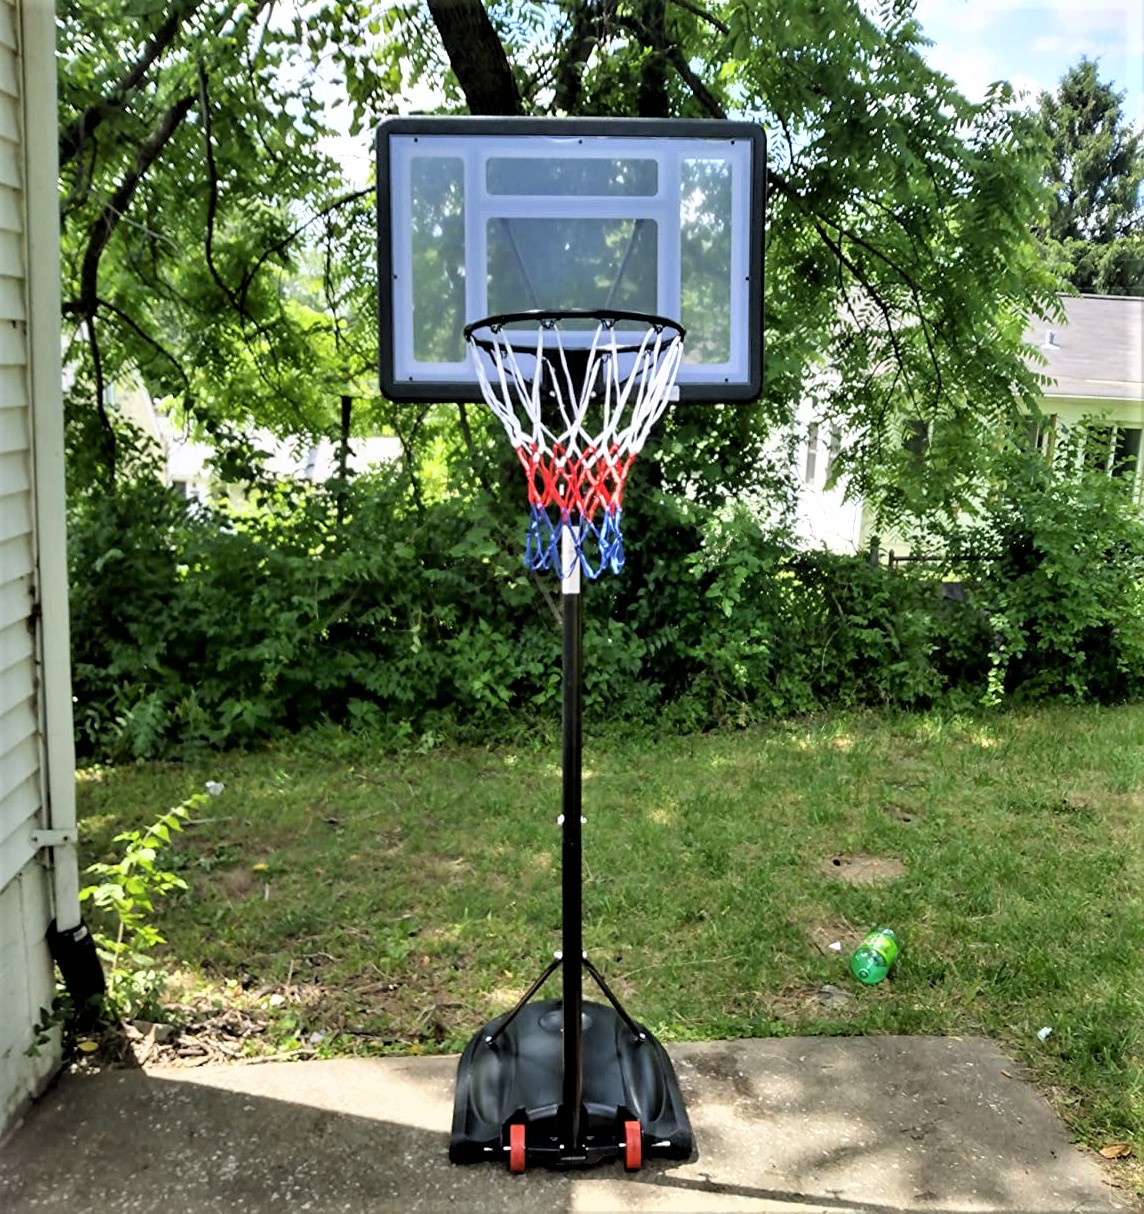 7.2-9.2FT Height-Adjustable Basketball Hoop System for Kids Youth w/Wheels 